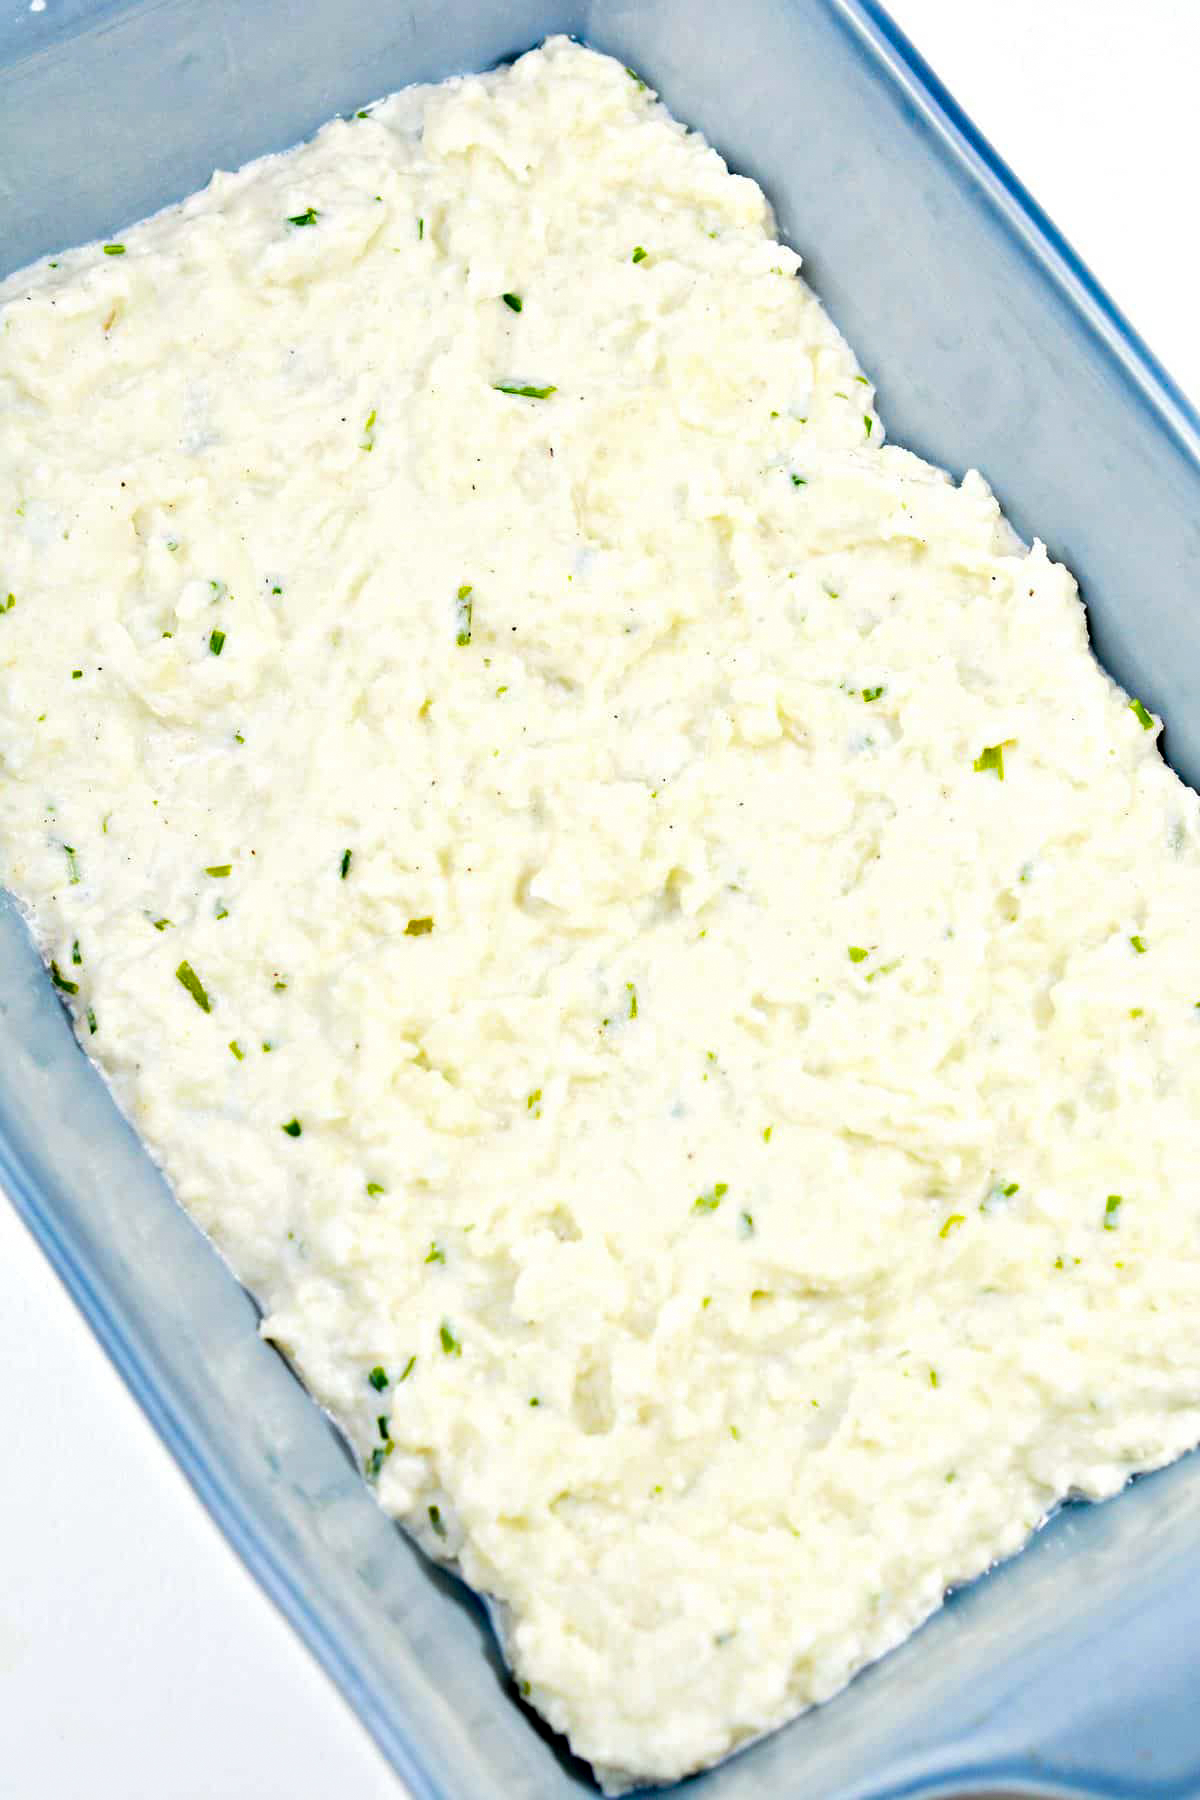 Place the cauliflower mixture in an even layer at the bottom of a well-greased baking dish.